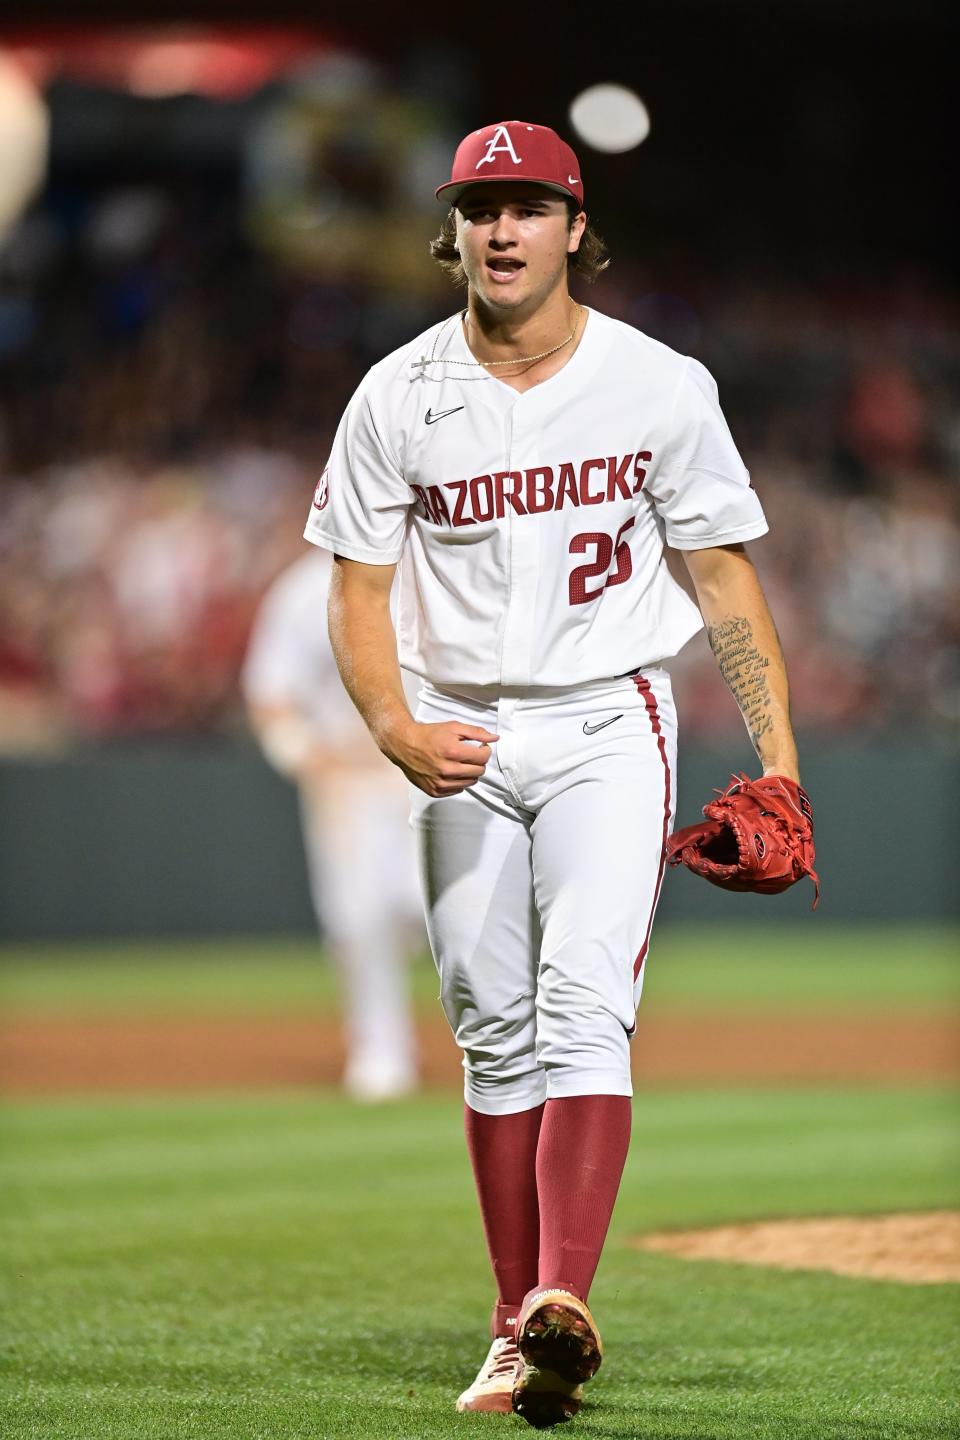 Arkansas relief pitcher Brady Tygart celebrates while coming off the mound in a game against Vanderbilt on May 13, 2022, at Baum-Walker Stadium.